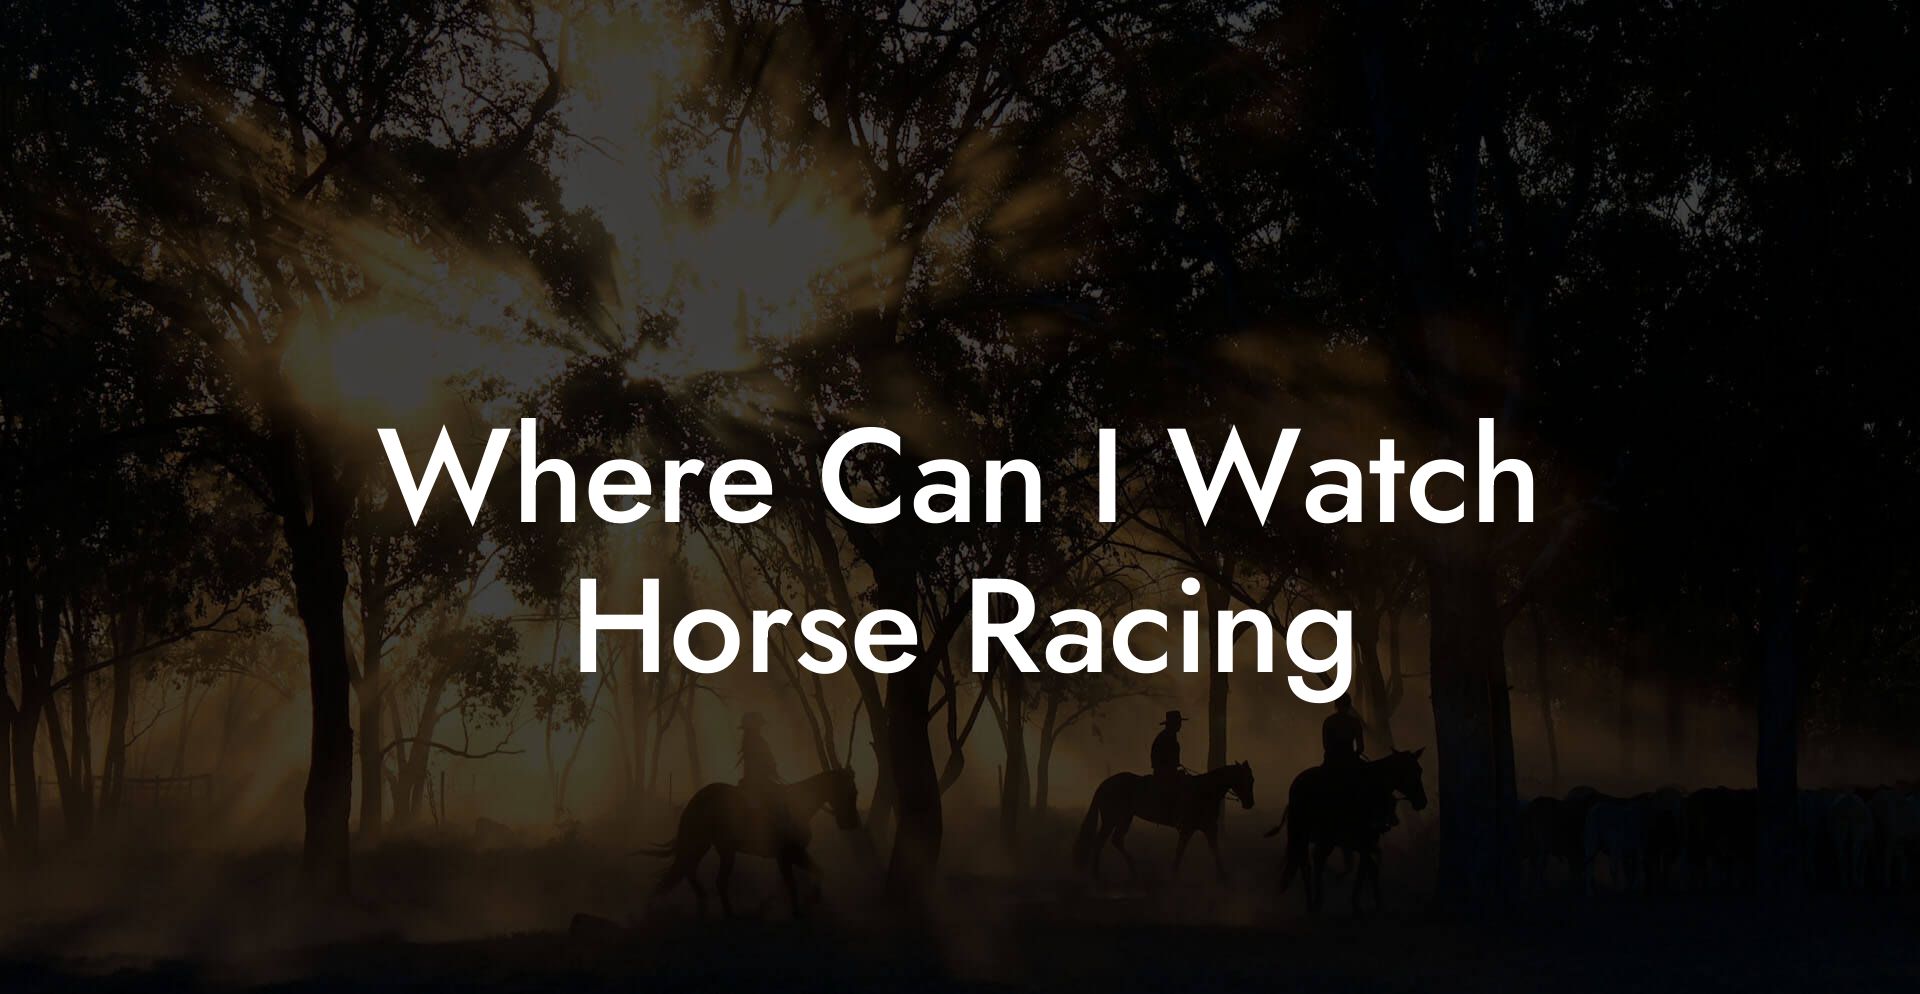 Where Can I Watch Horse Racing